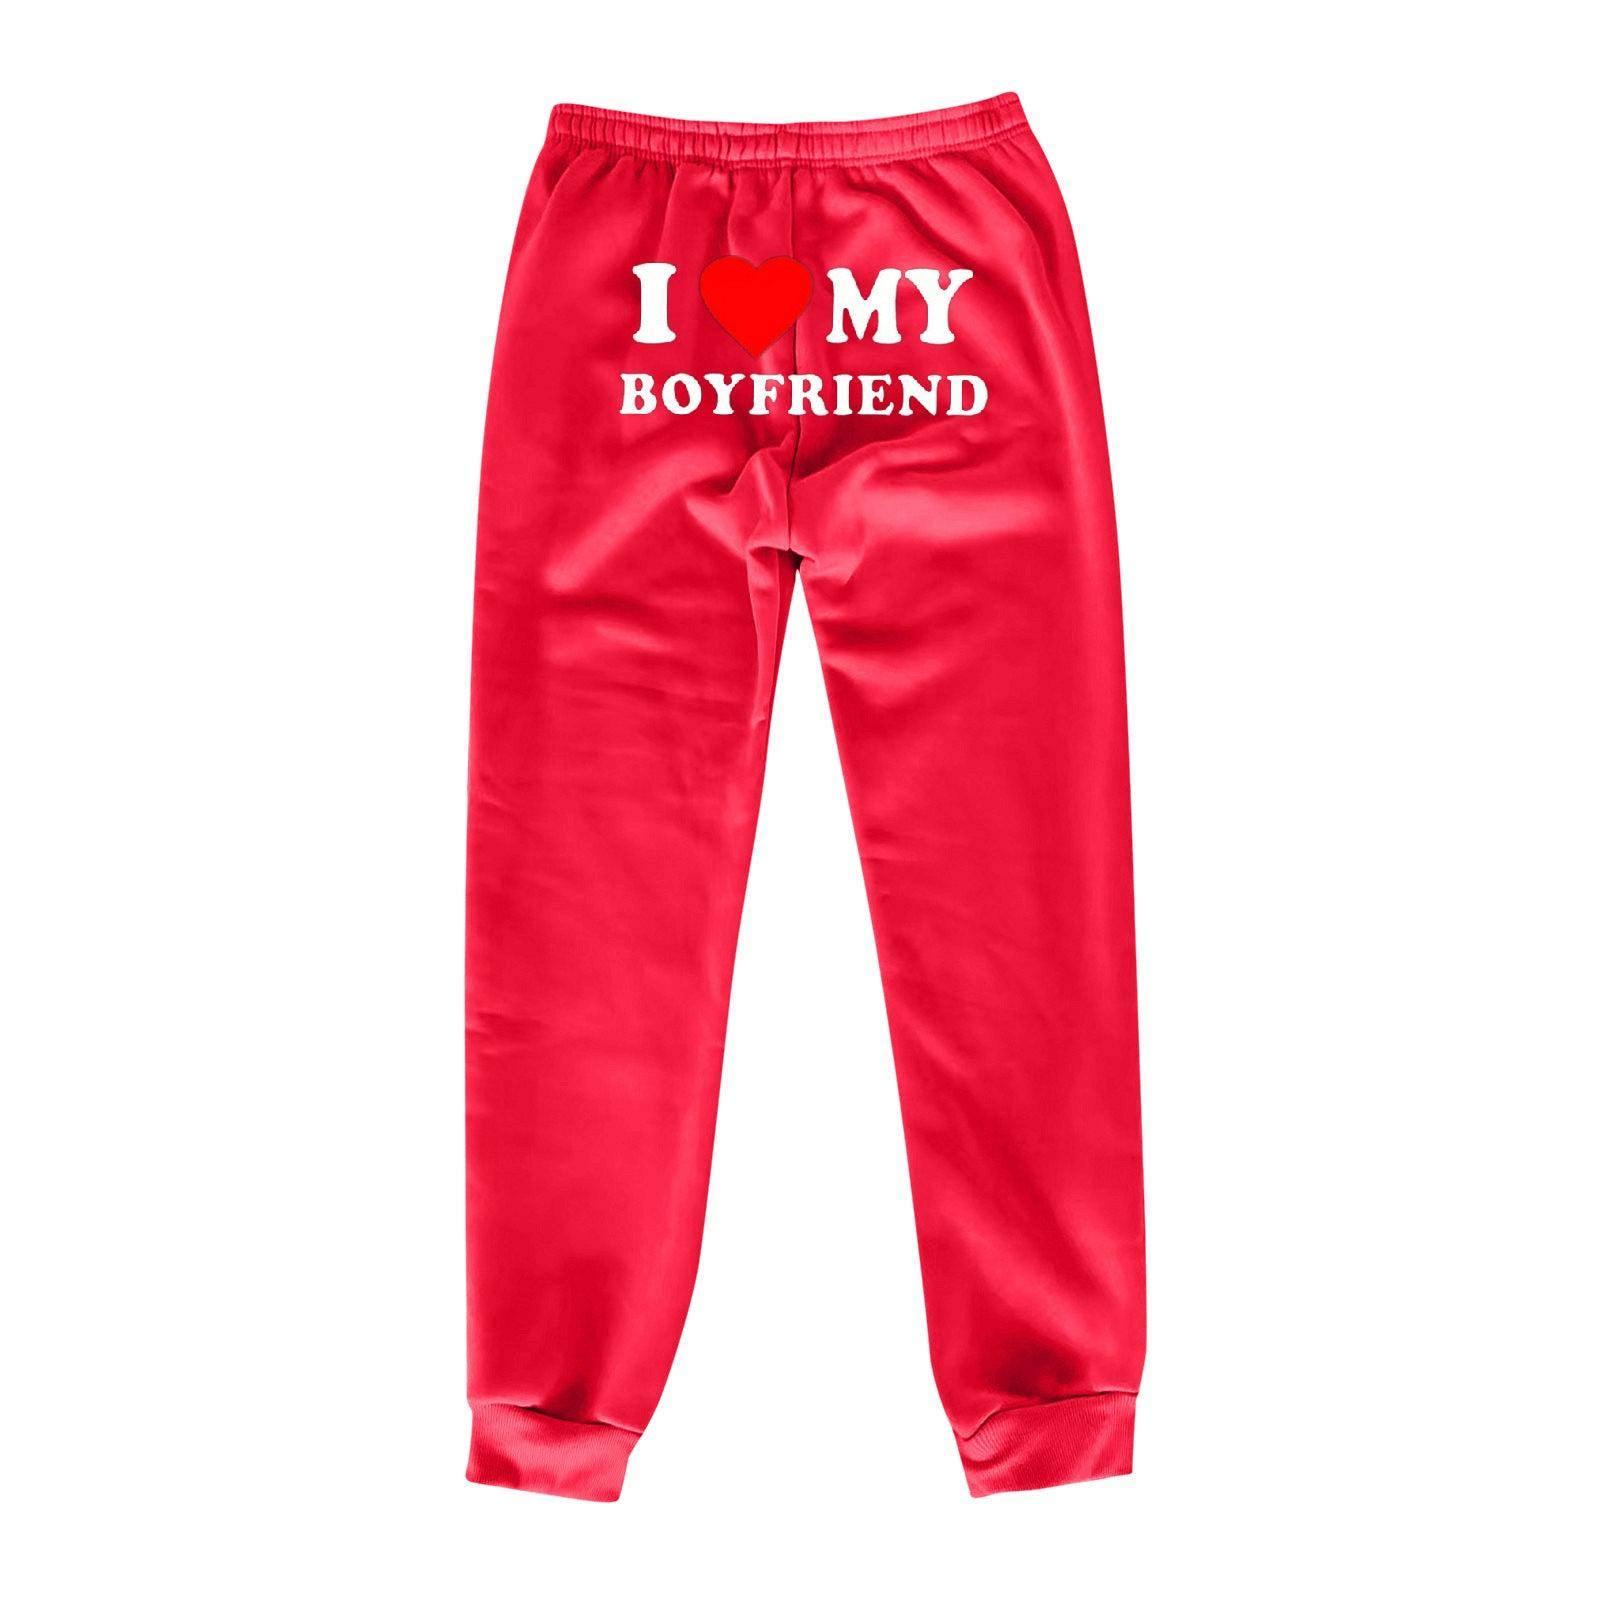 I Love MY BOYFRIEND Printed Trousers Casual Sweatpants Men-Red Back Picture-11